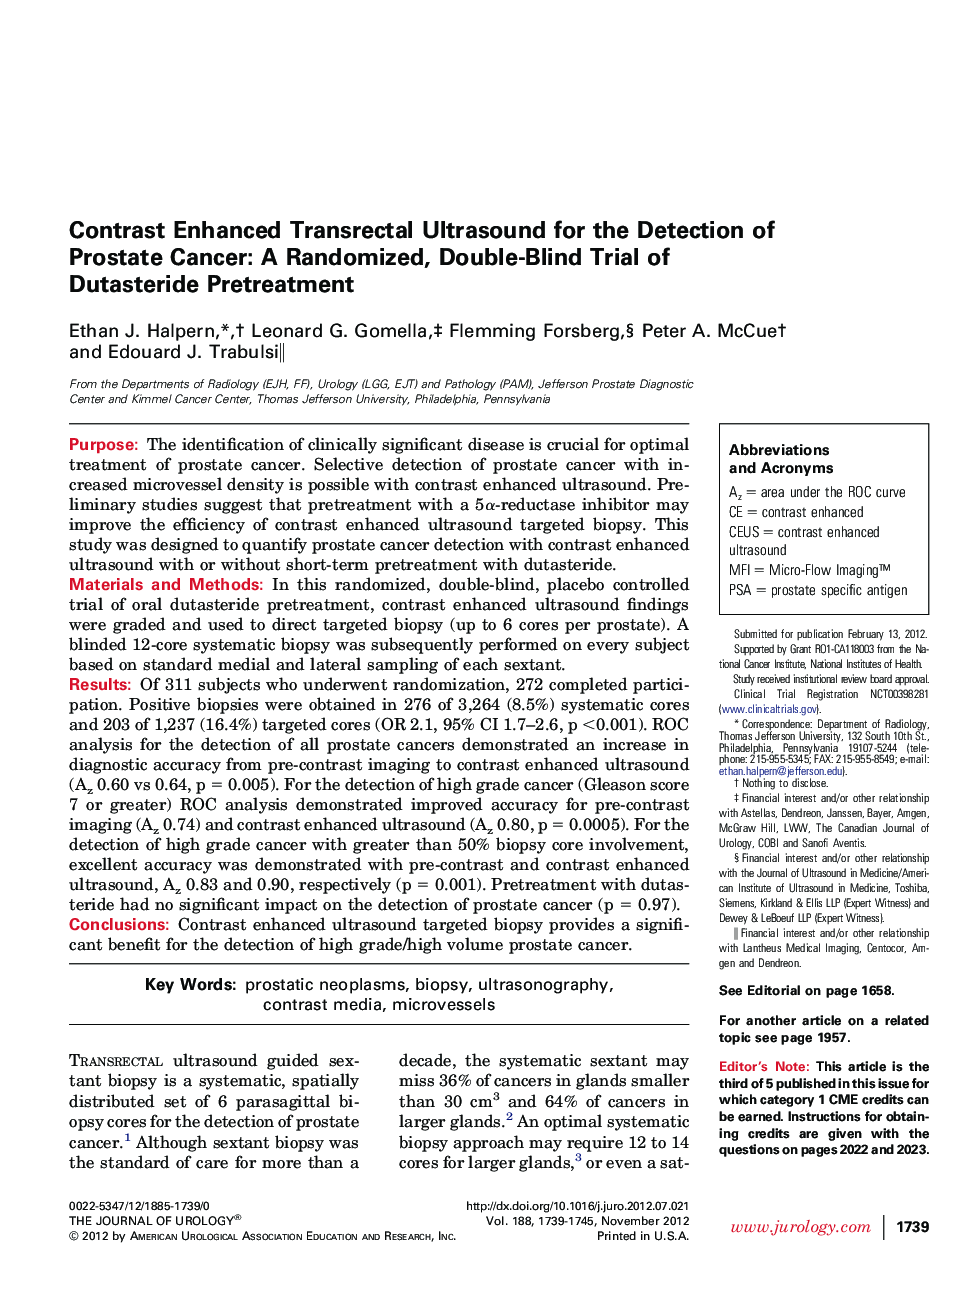 Contrast Enhanced Transrectal Ultrasound for the Detection of Prostate Cancer: A Randomized, Double-Blind Trial of Dutasteride Pretreatment